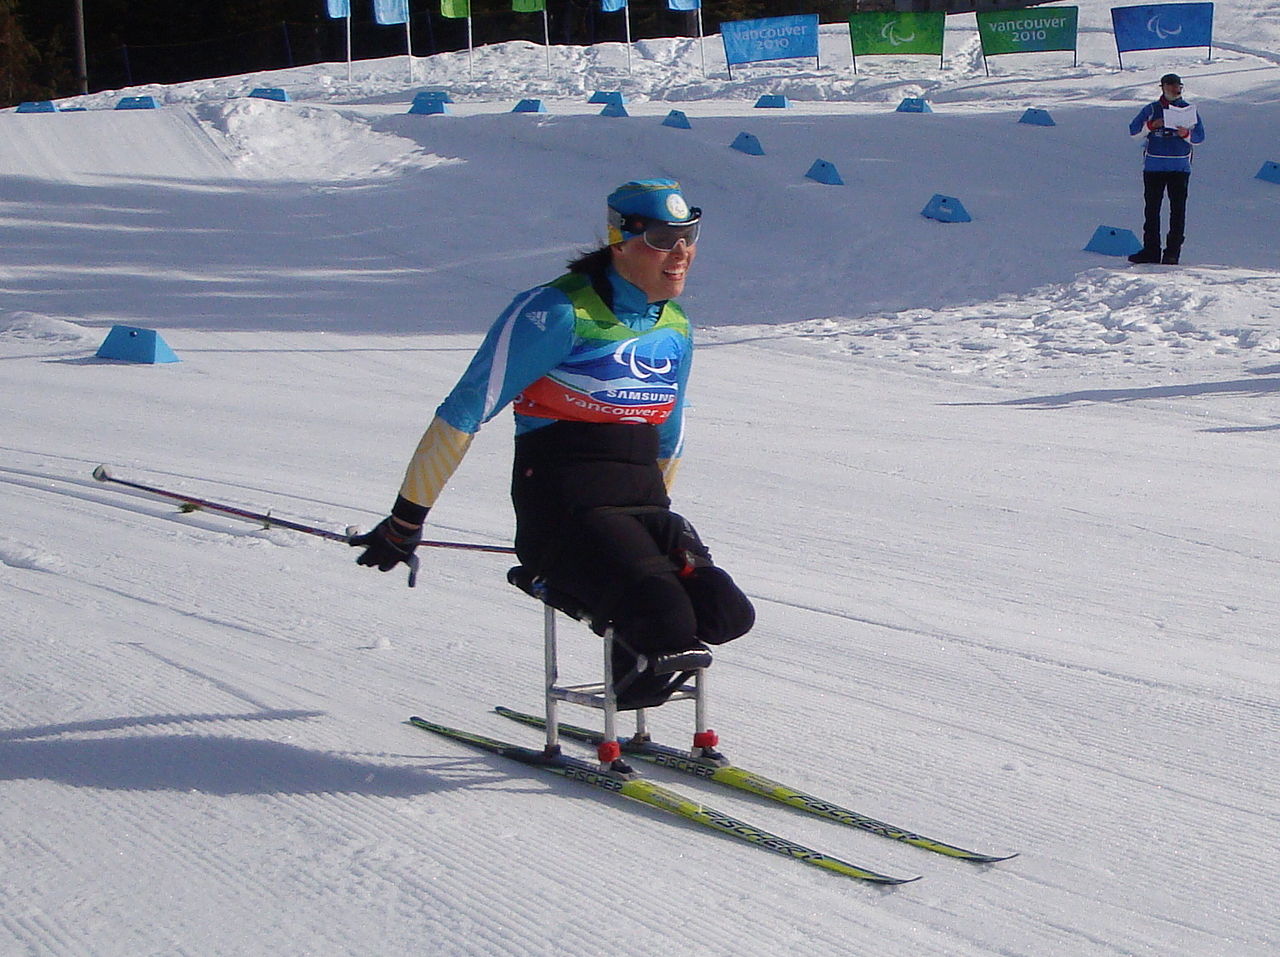 Olena Iurkovska of Ukraine competing on cross-country sit-skis at the 2010 Winter Paralympics